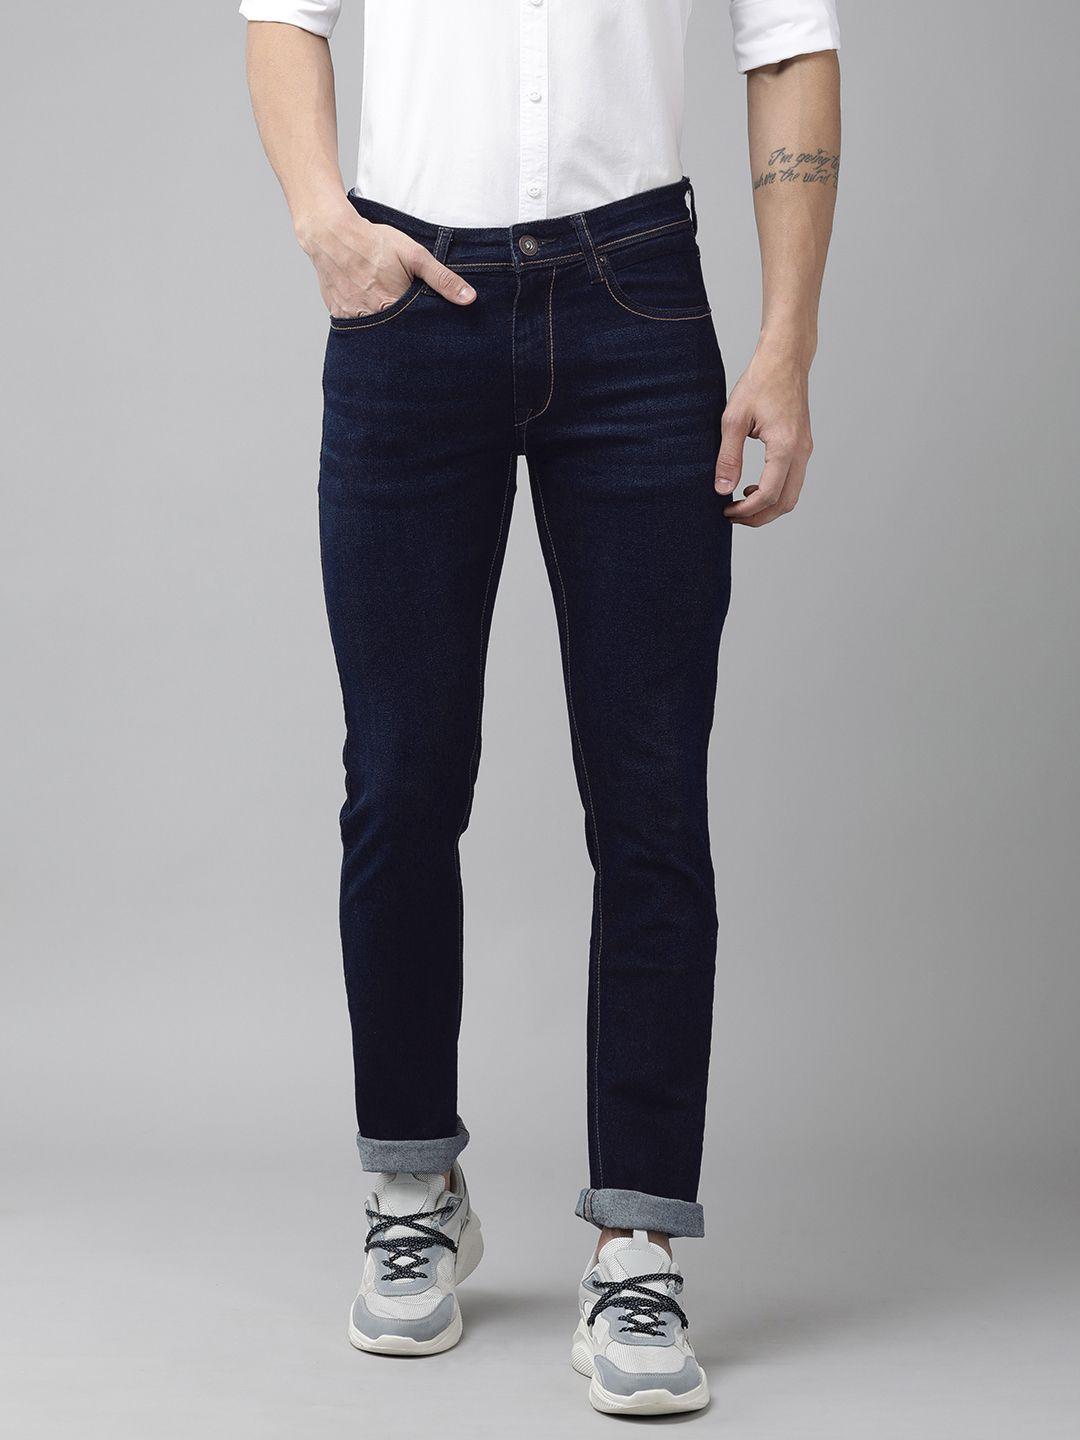 beat london by pepe jeans men vapour slim fit light fade mid-rise stretchable jeans